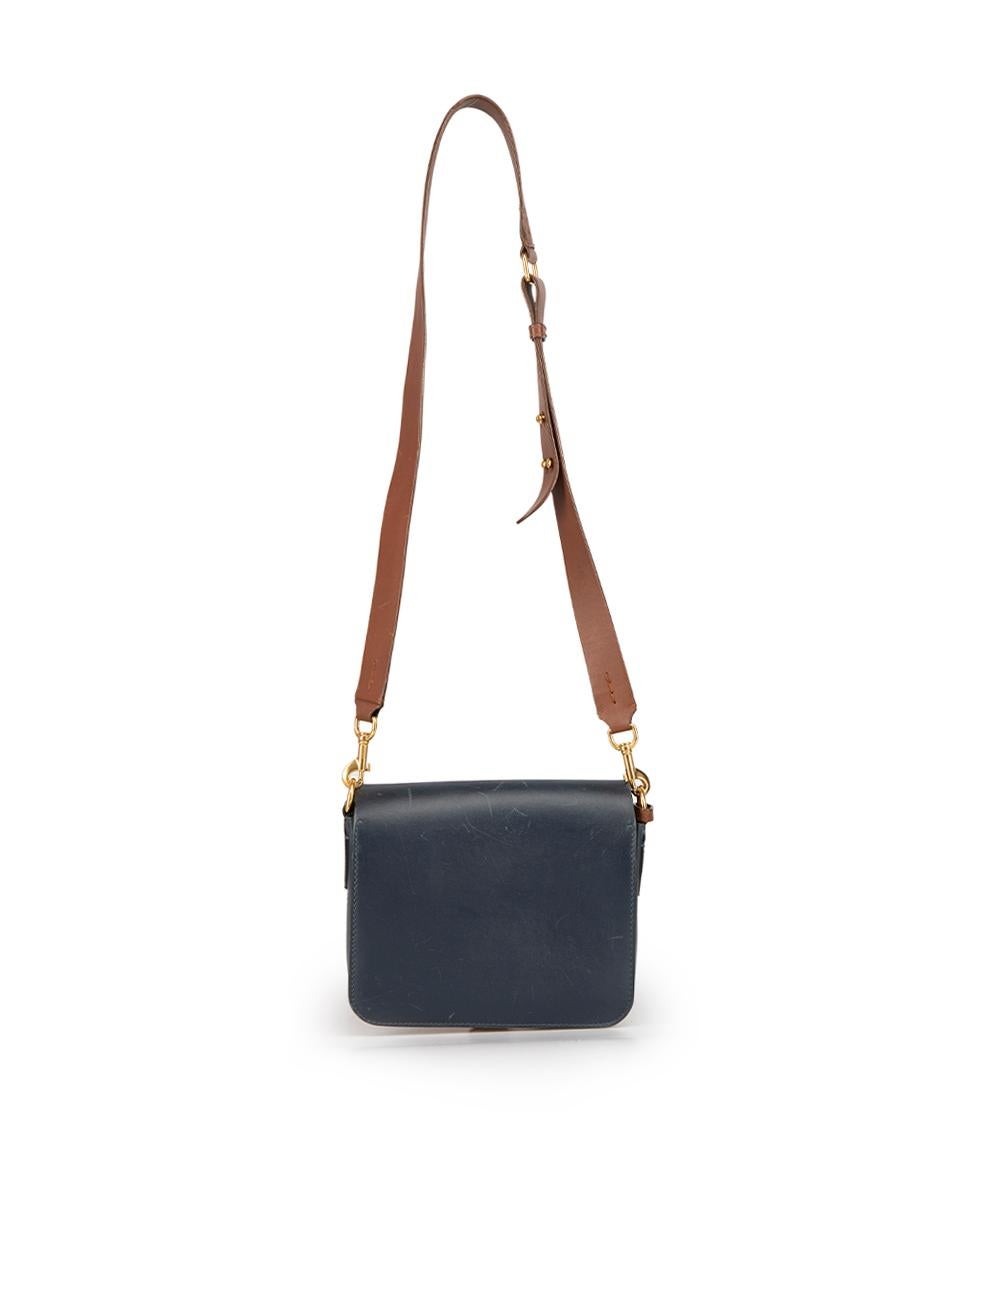 Burberry Navy Leather Crossbody Bag In Good Condition In London, GB